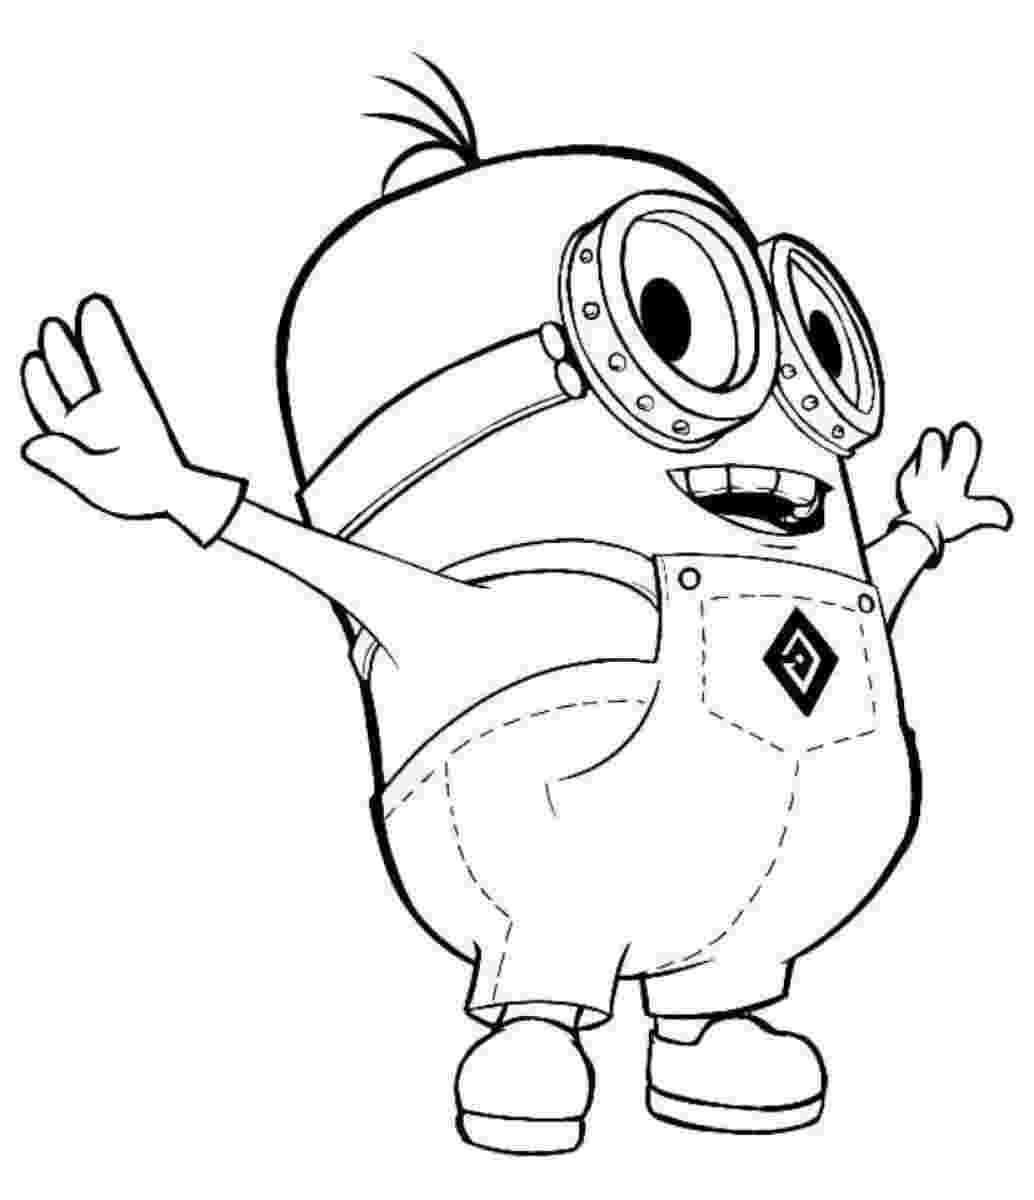 despicable me 2 free coloring pages to print despicable me 3 coloring pages printable coloring for to me coloring despicable pages print free 2 